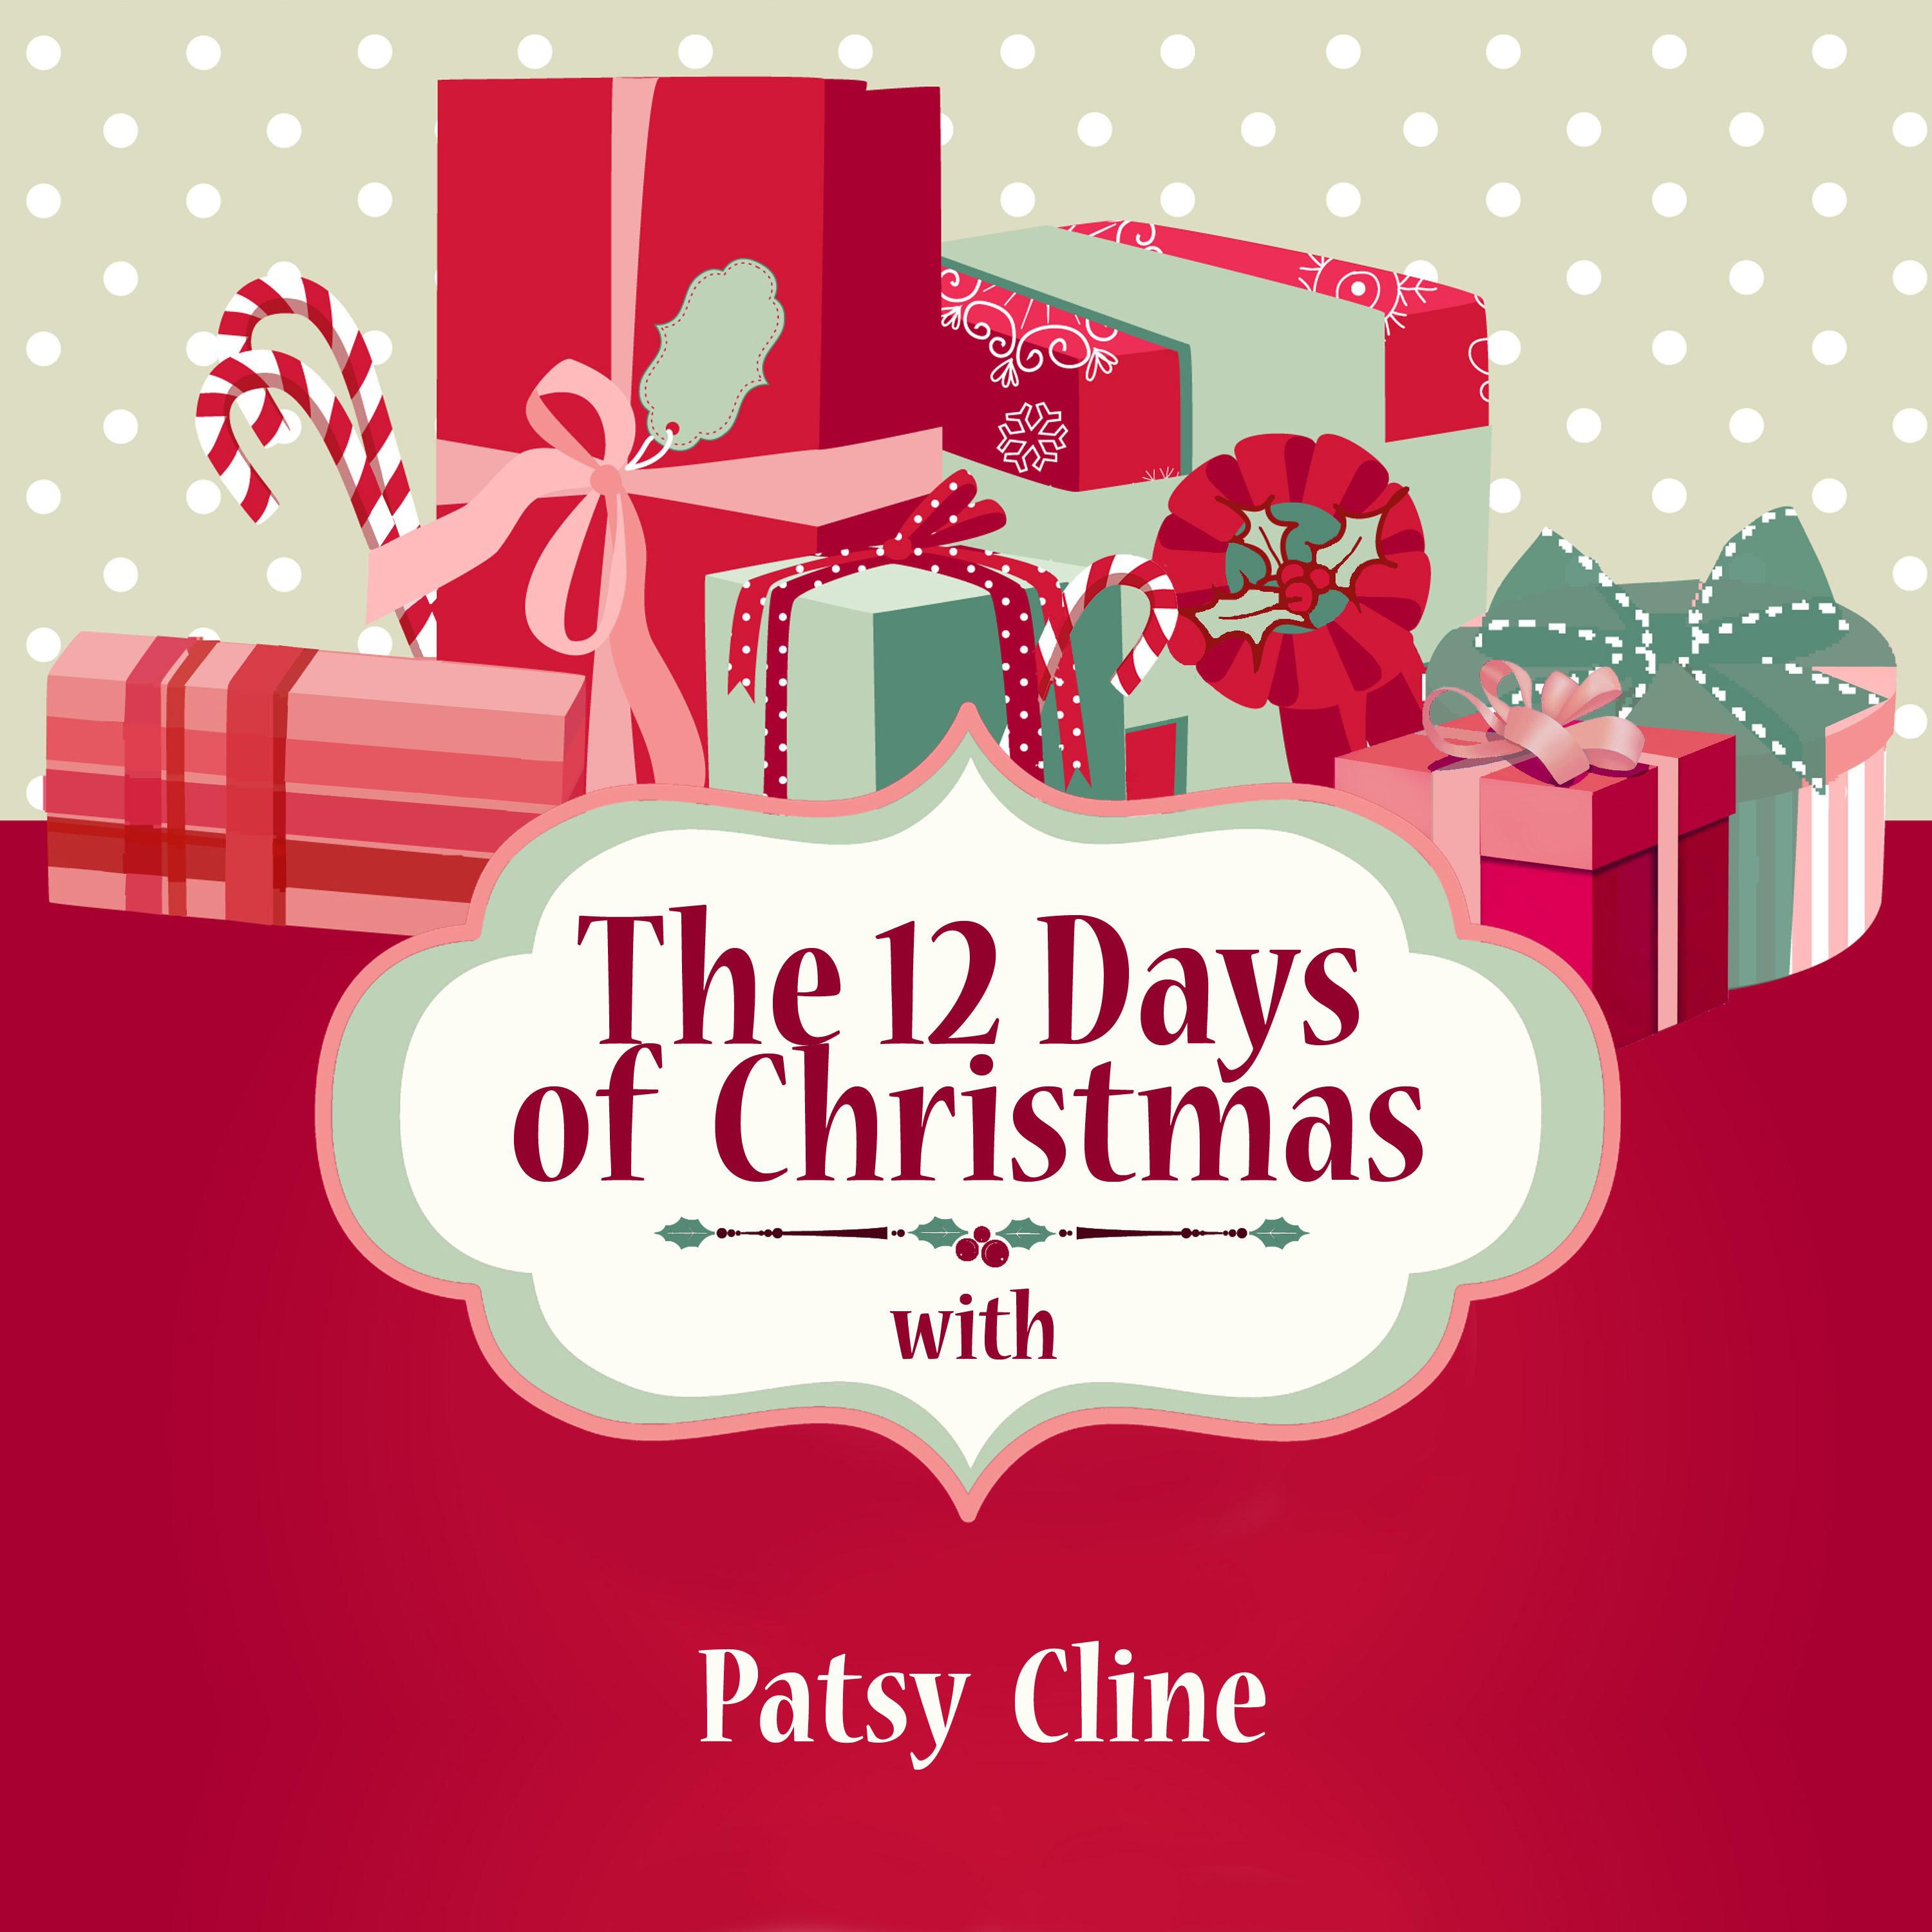 The 12 Days of Christmas with Patsy Cline